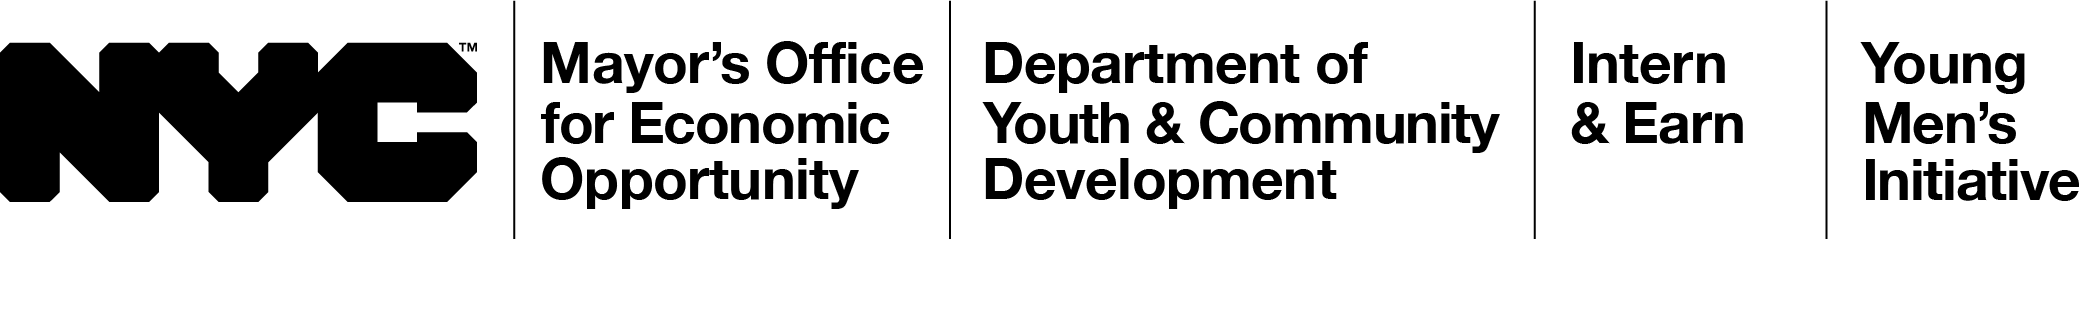 NY Department of Youth & Community Development